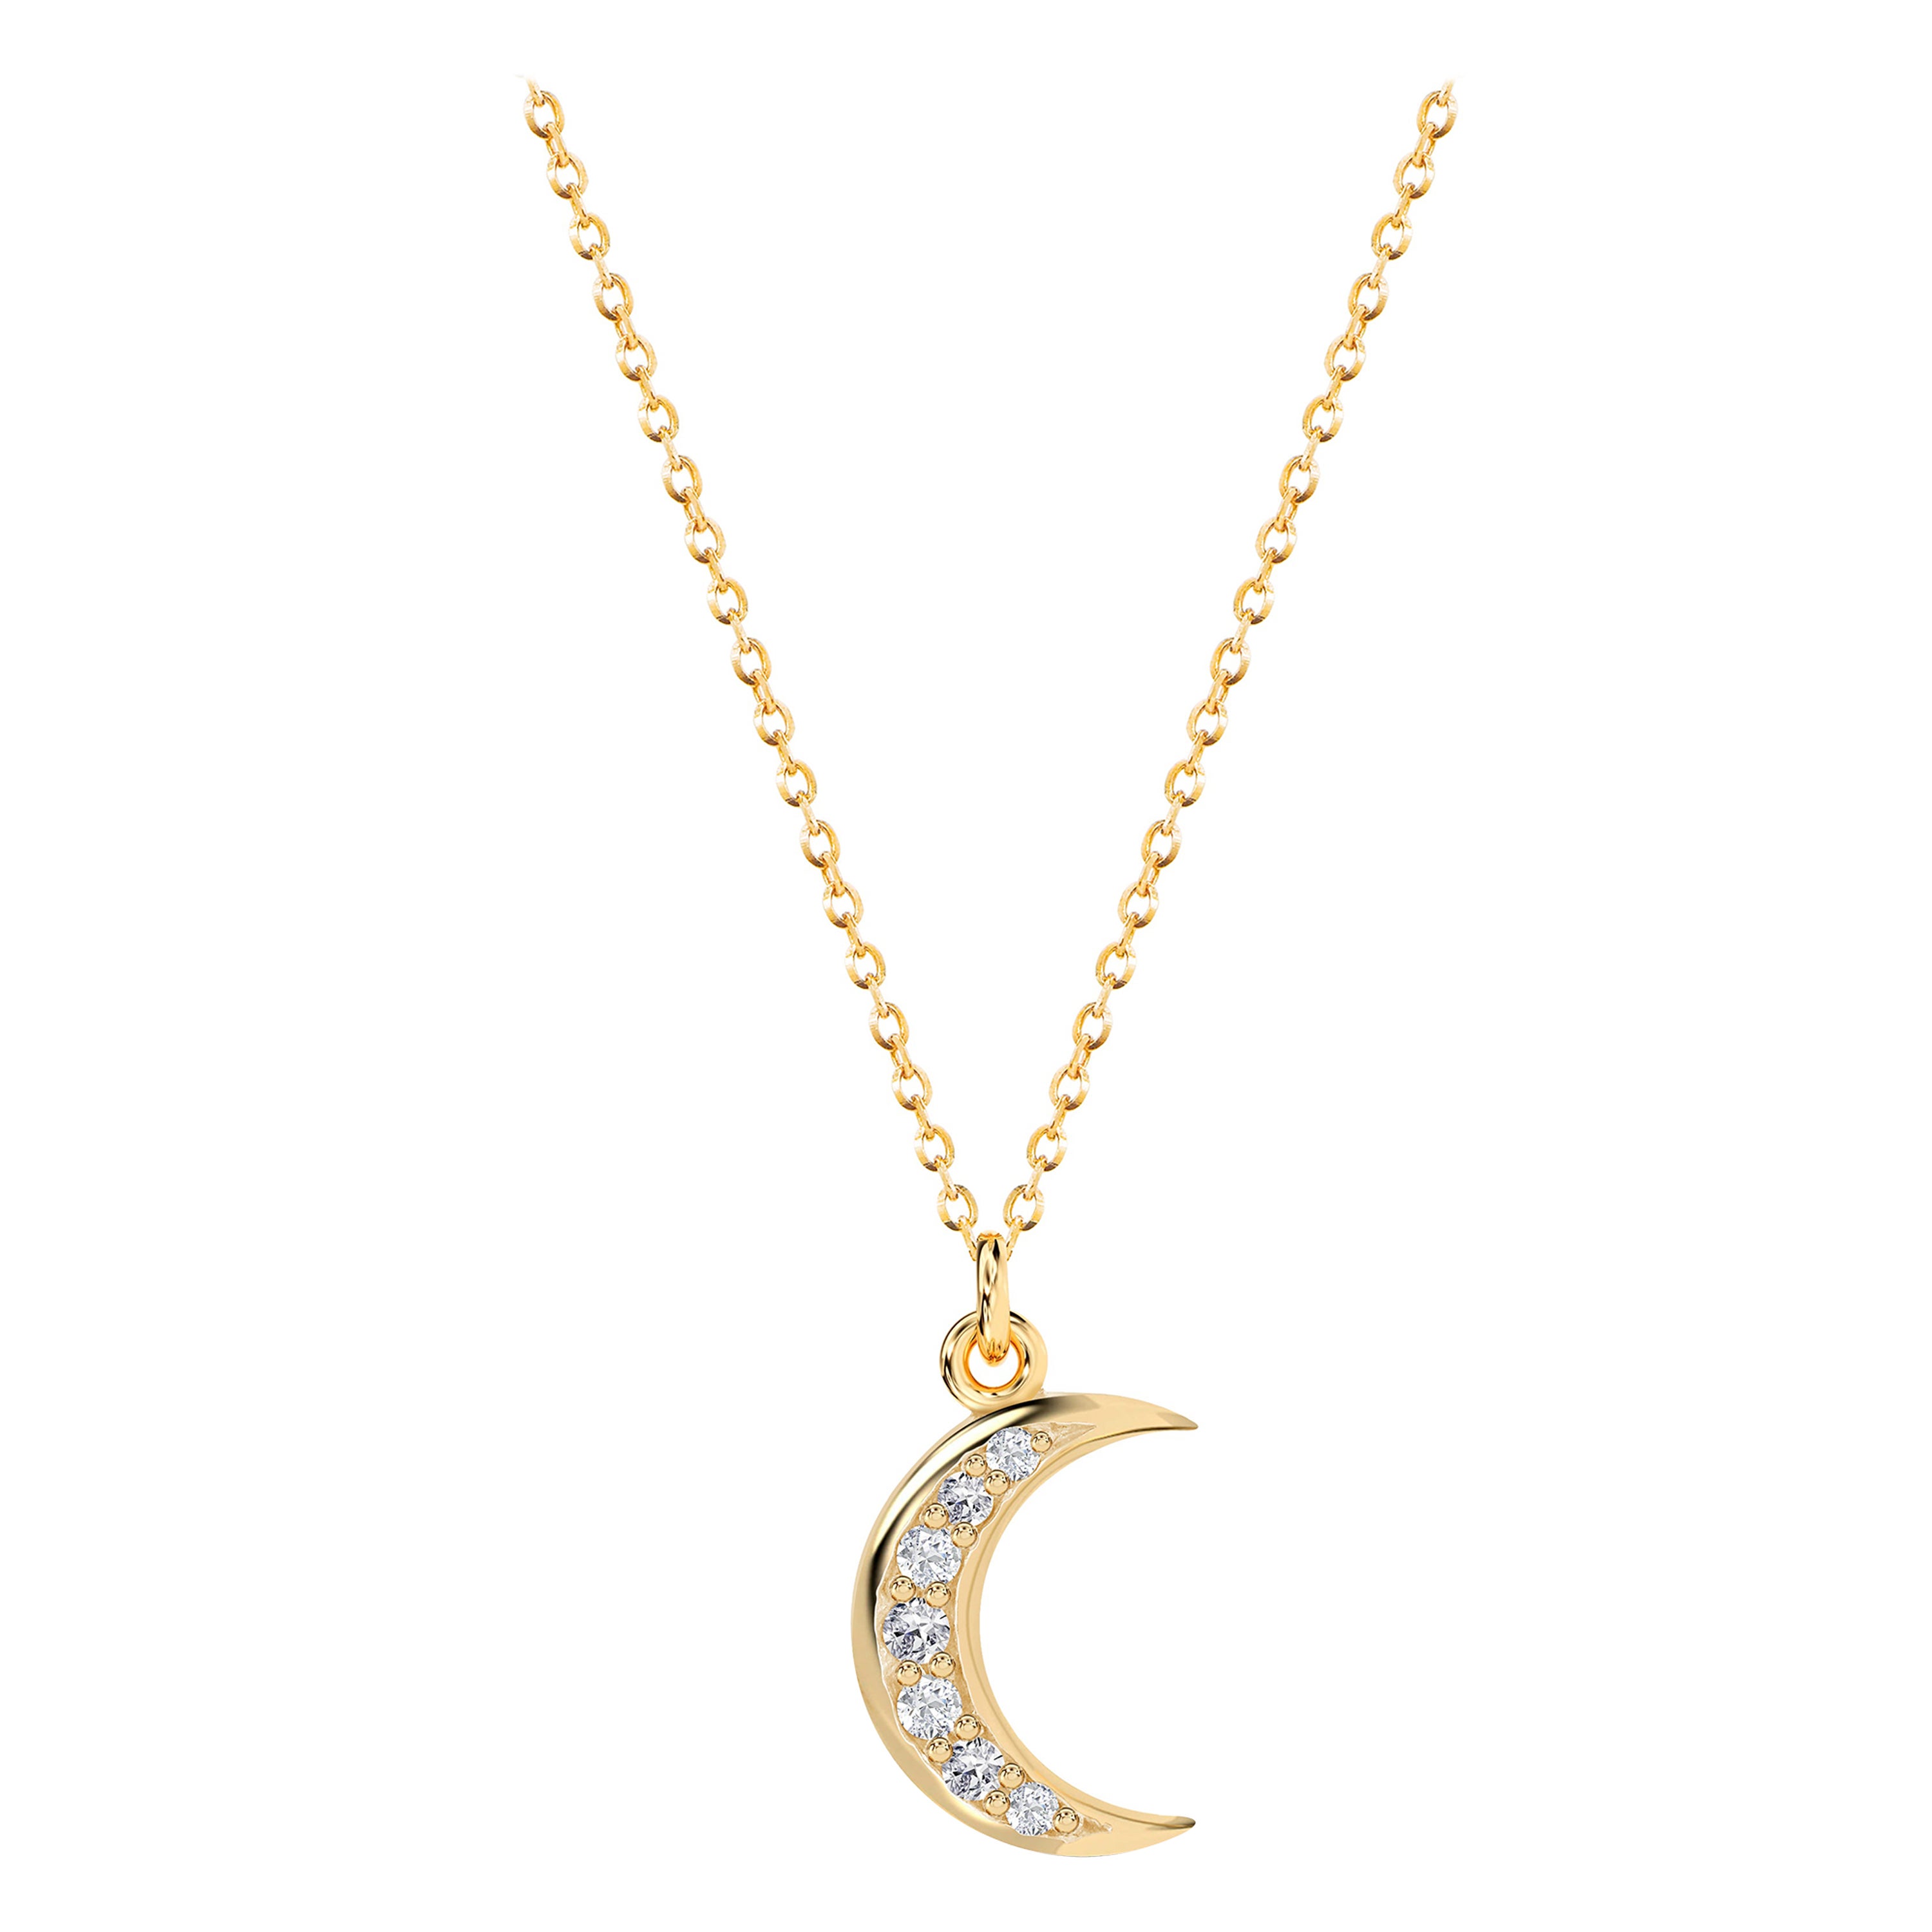 0.05 Ct Diamond Crescent Moon Necklace in 14K Gold For Sale